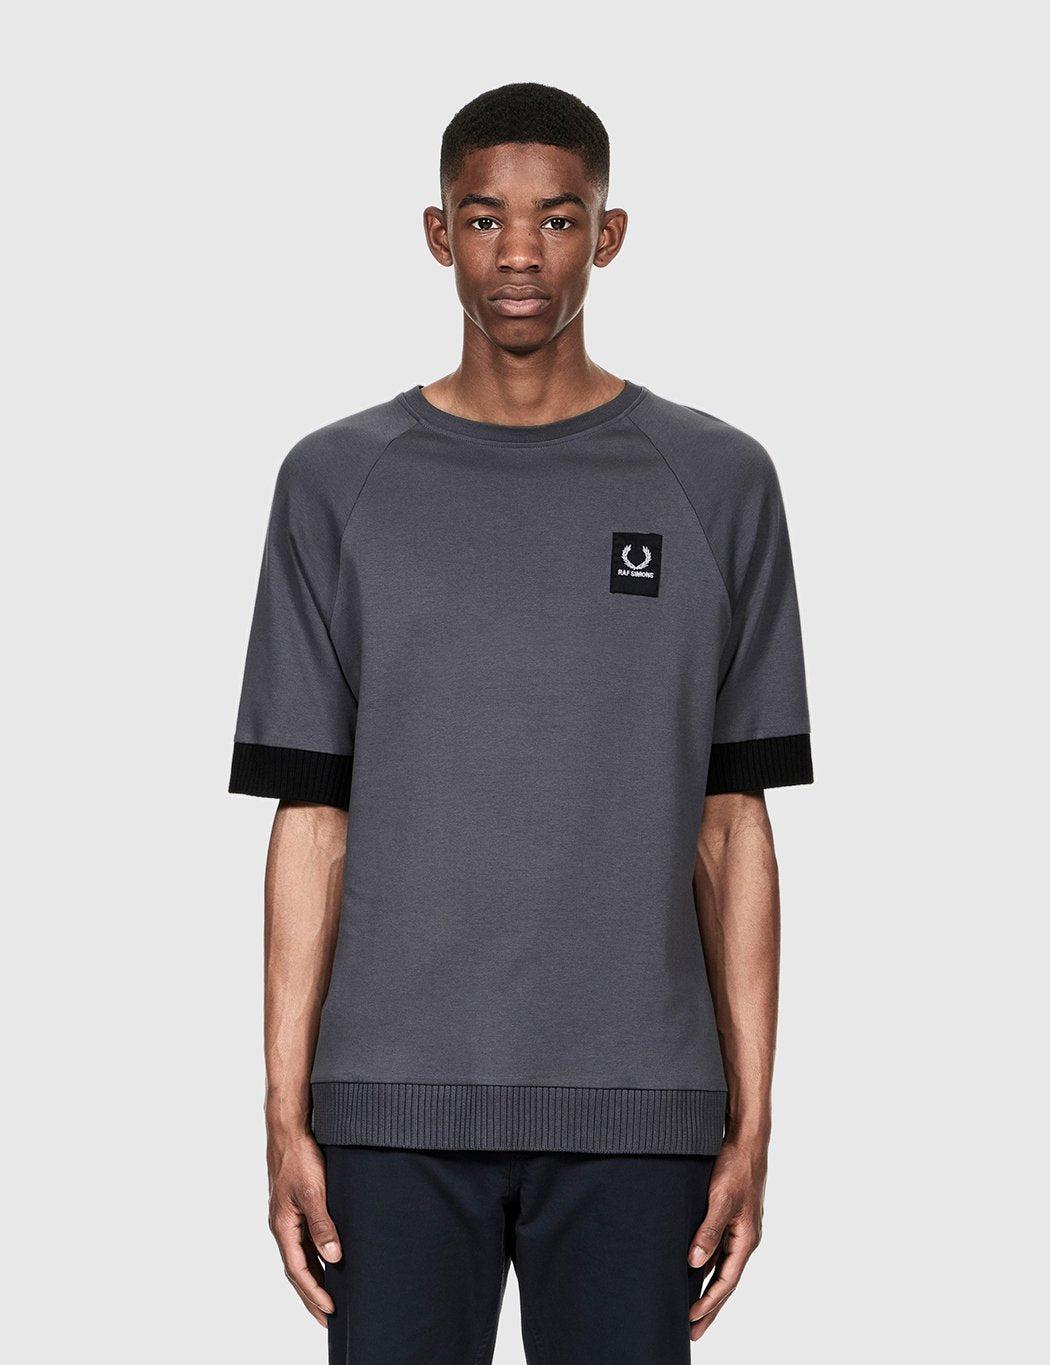 Fred Perry X Raf Simons Raglan Sleeve T-shirt in Blue for Men | Lyst